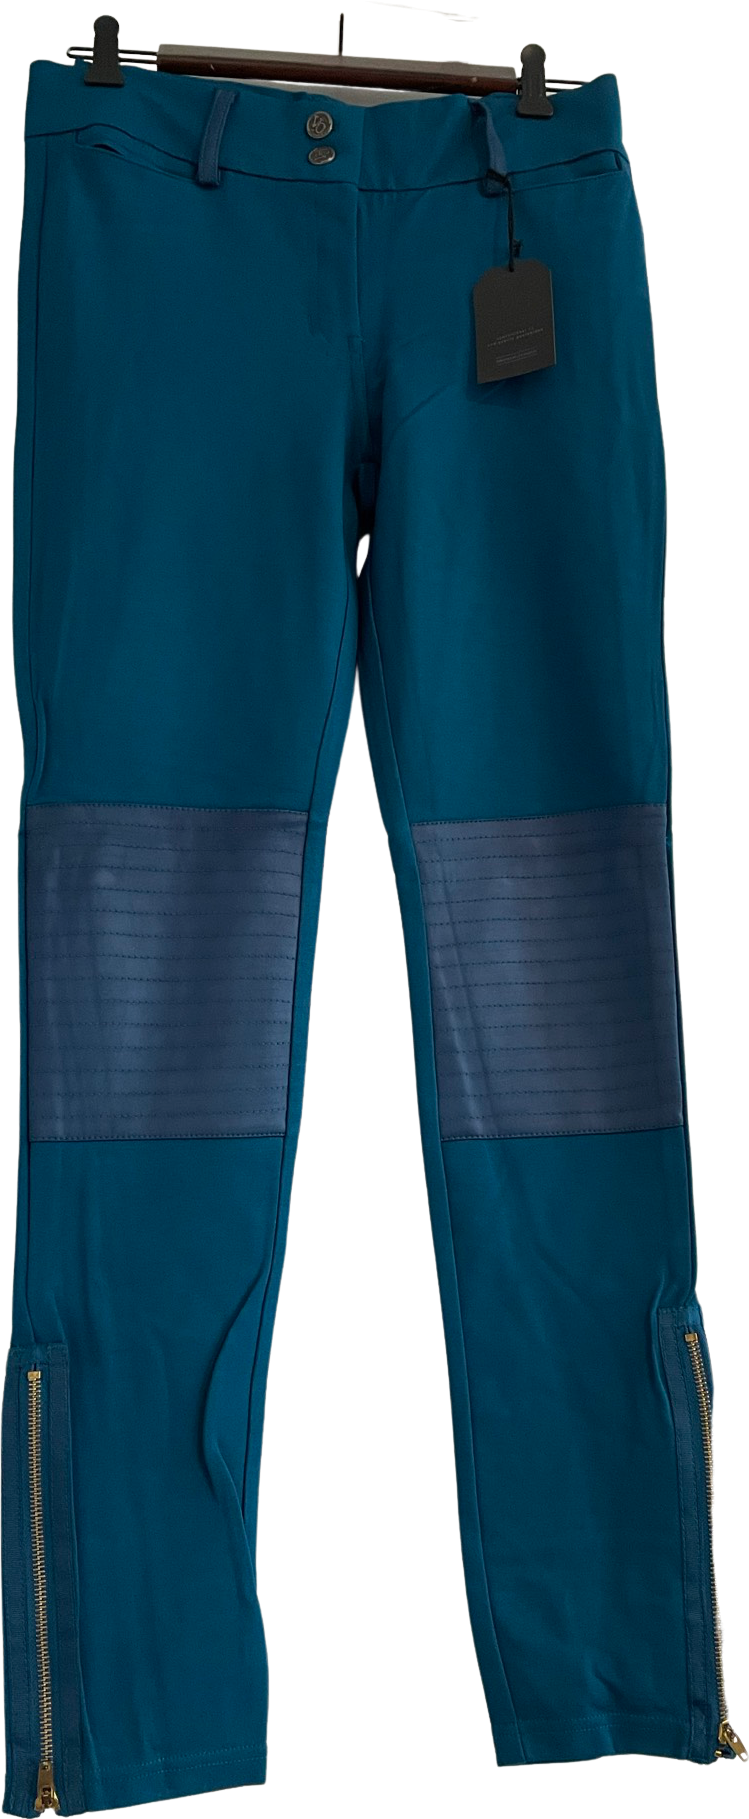 Women's Teal Ponte Pants With Pu / Zippers